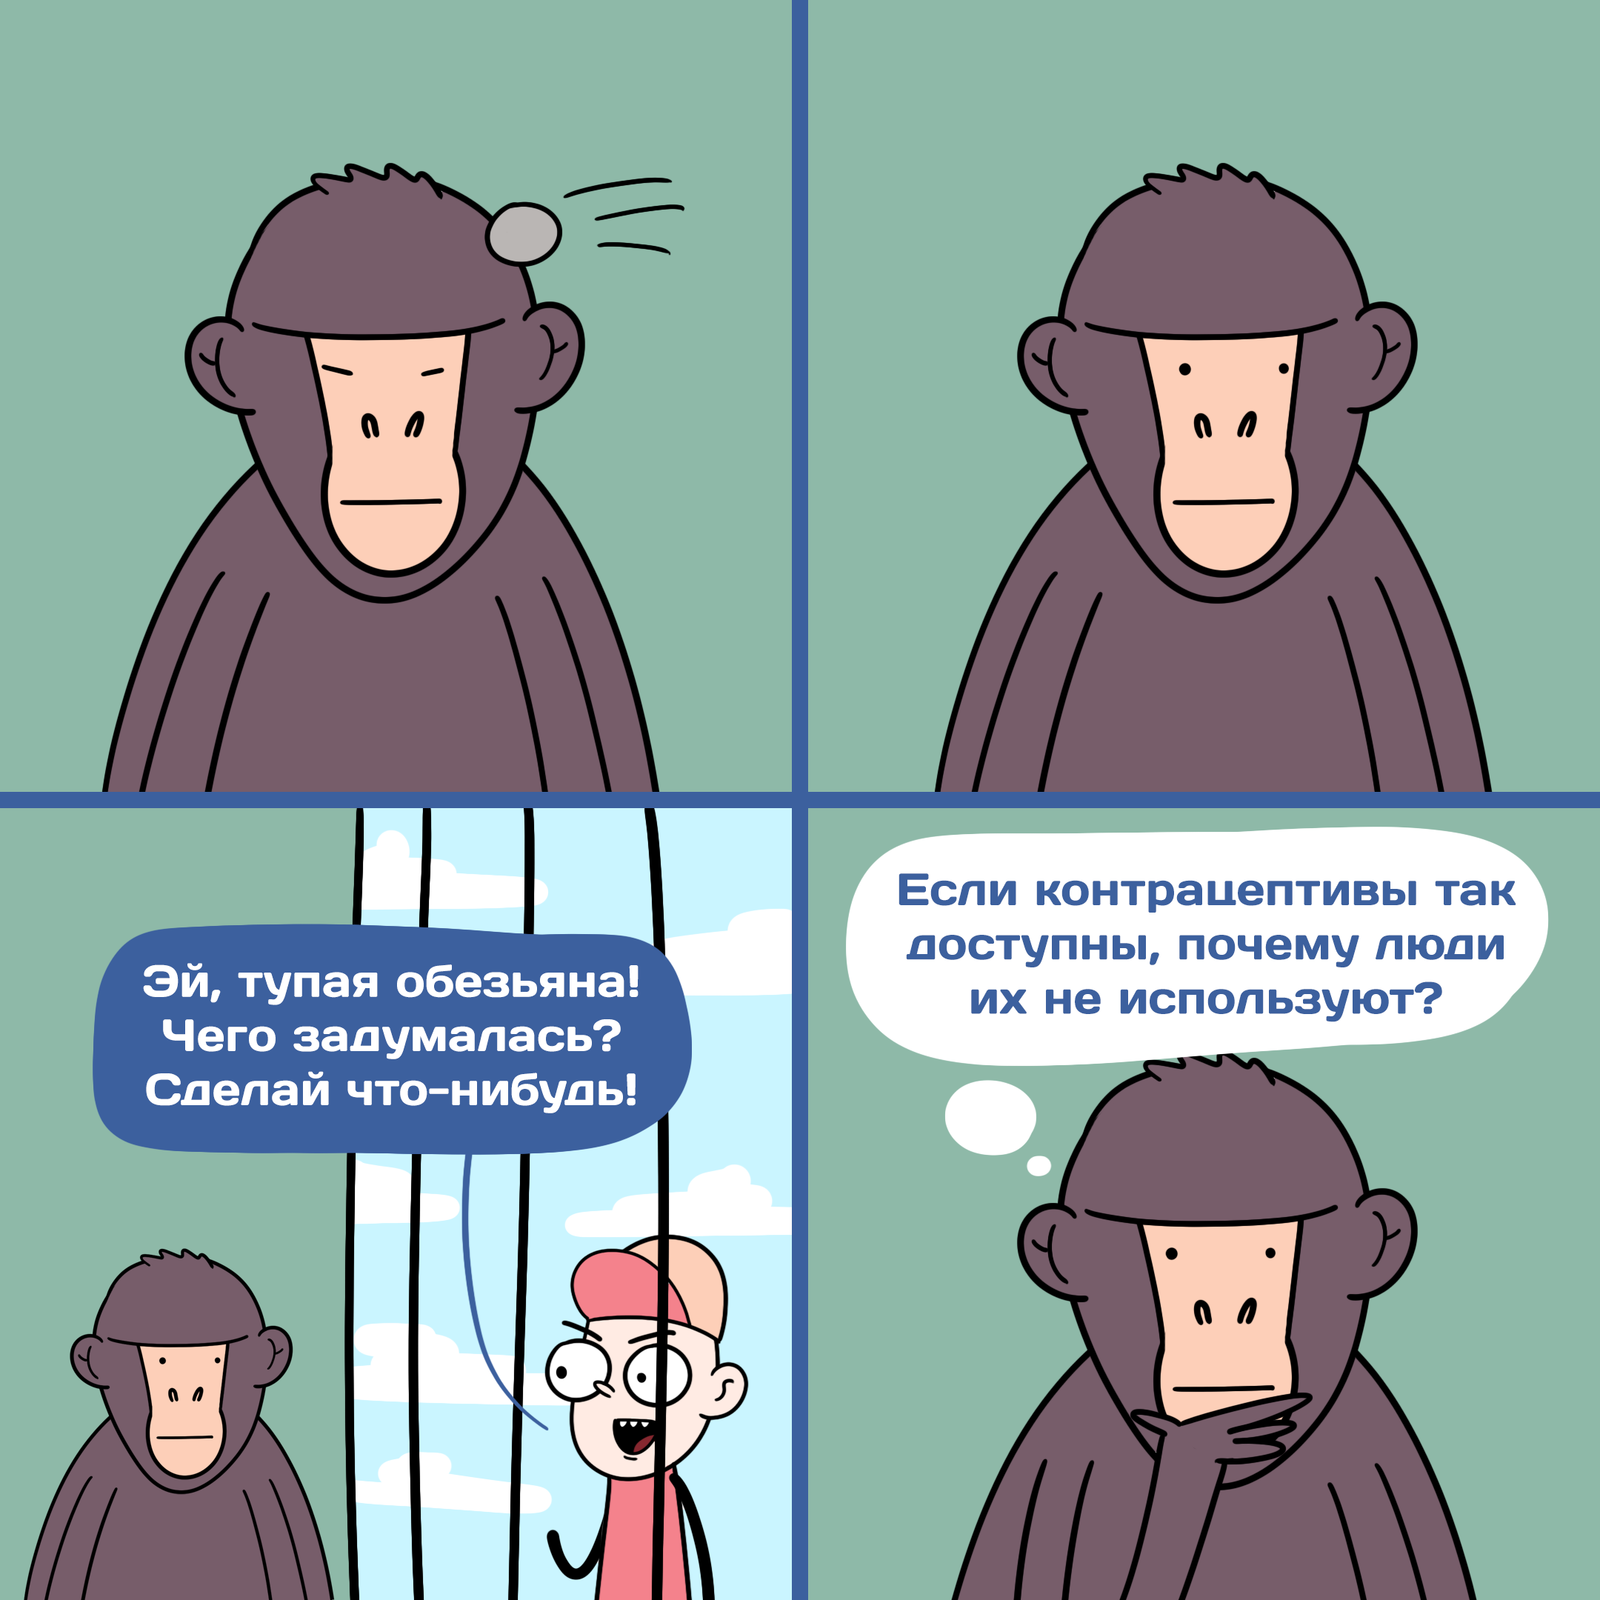 Newsletter #497: Experiment Shows Chimpanzee Self-Control Correlates with IQ - My, Obrazovach, Chimpanzee, Biology, Intelligence, The science, Comics, Humor